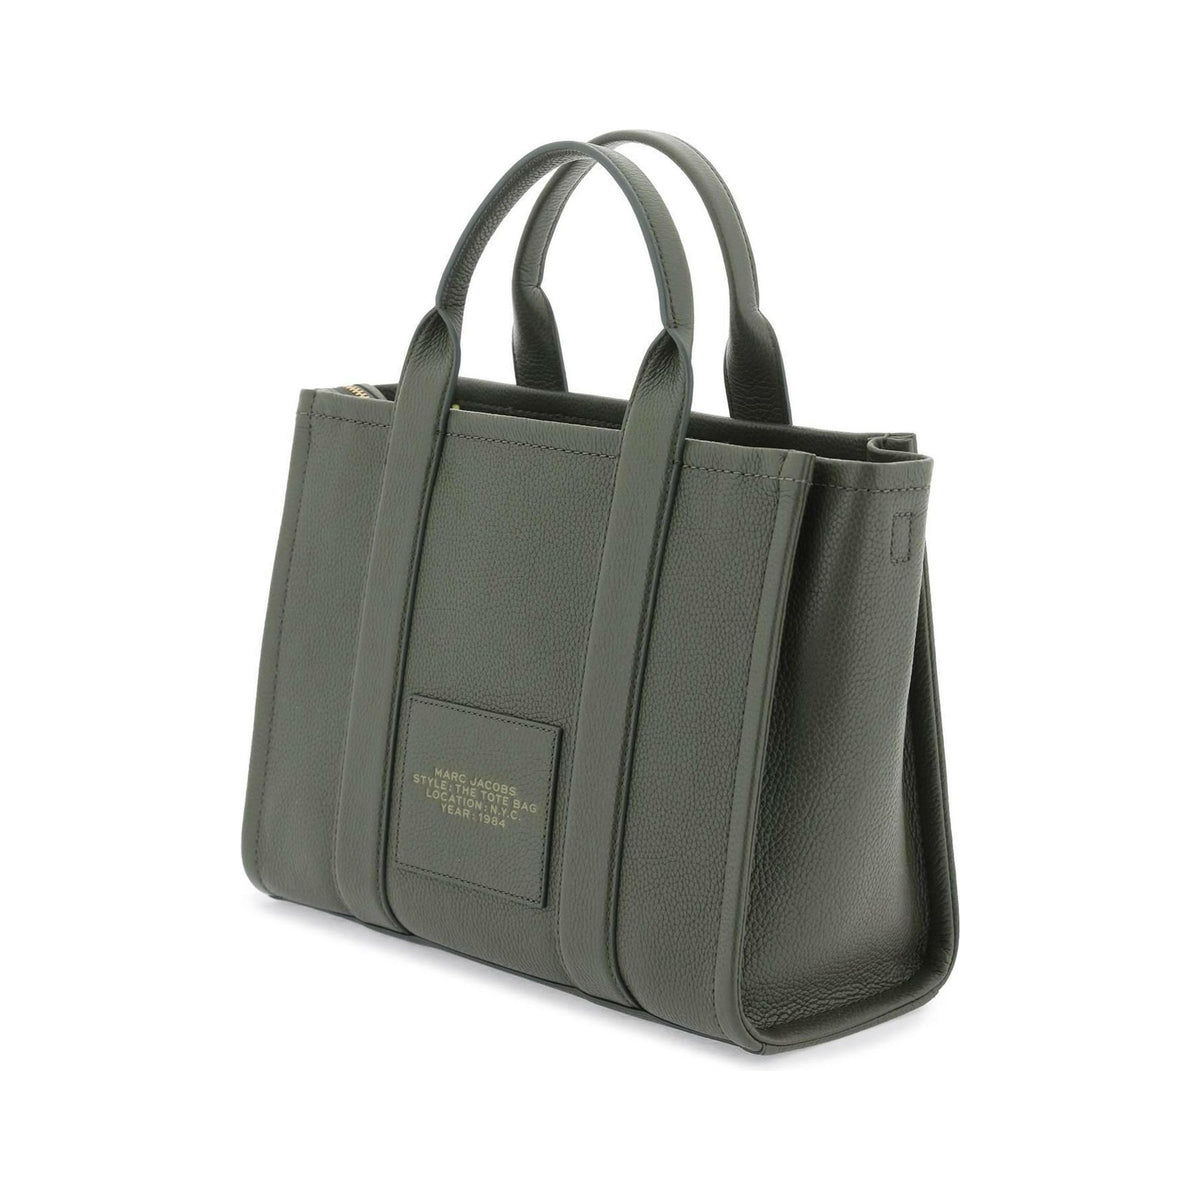 MARC JACOBS - Forest The Leather Medium Tote Bag - JOHN JULIA